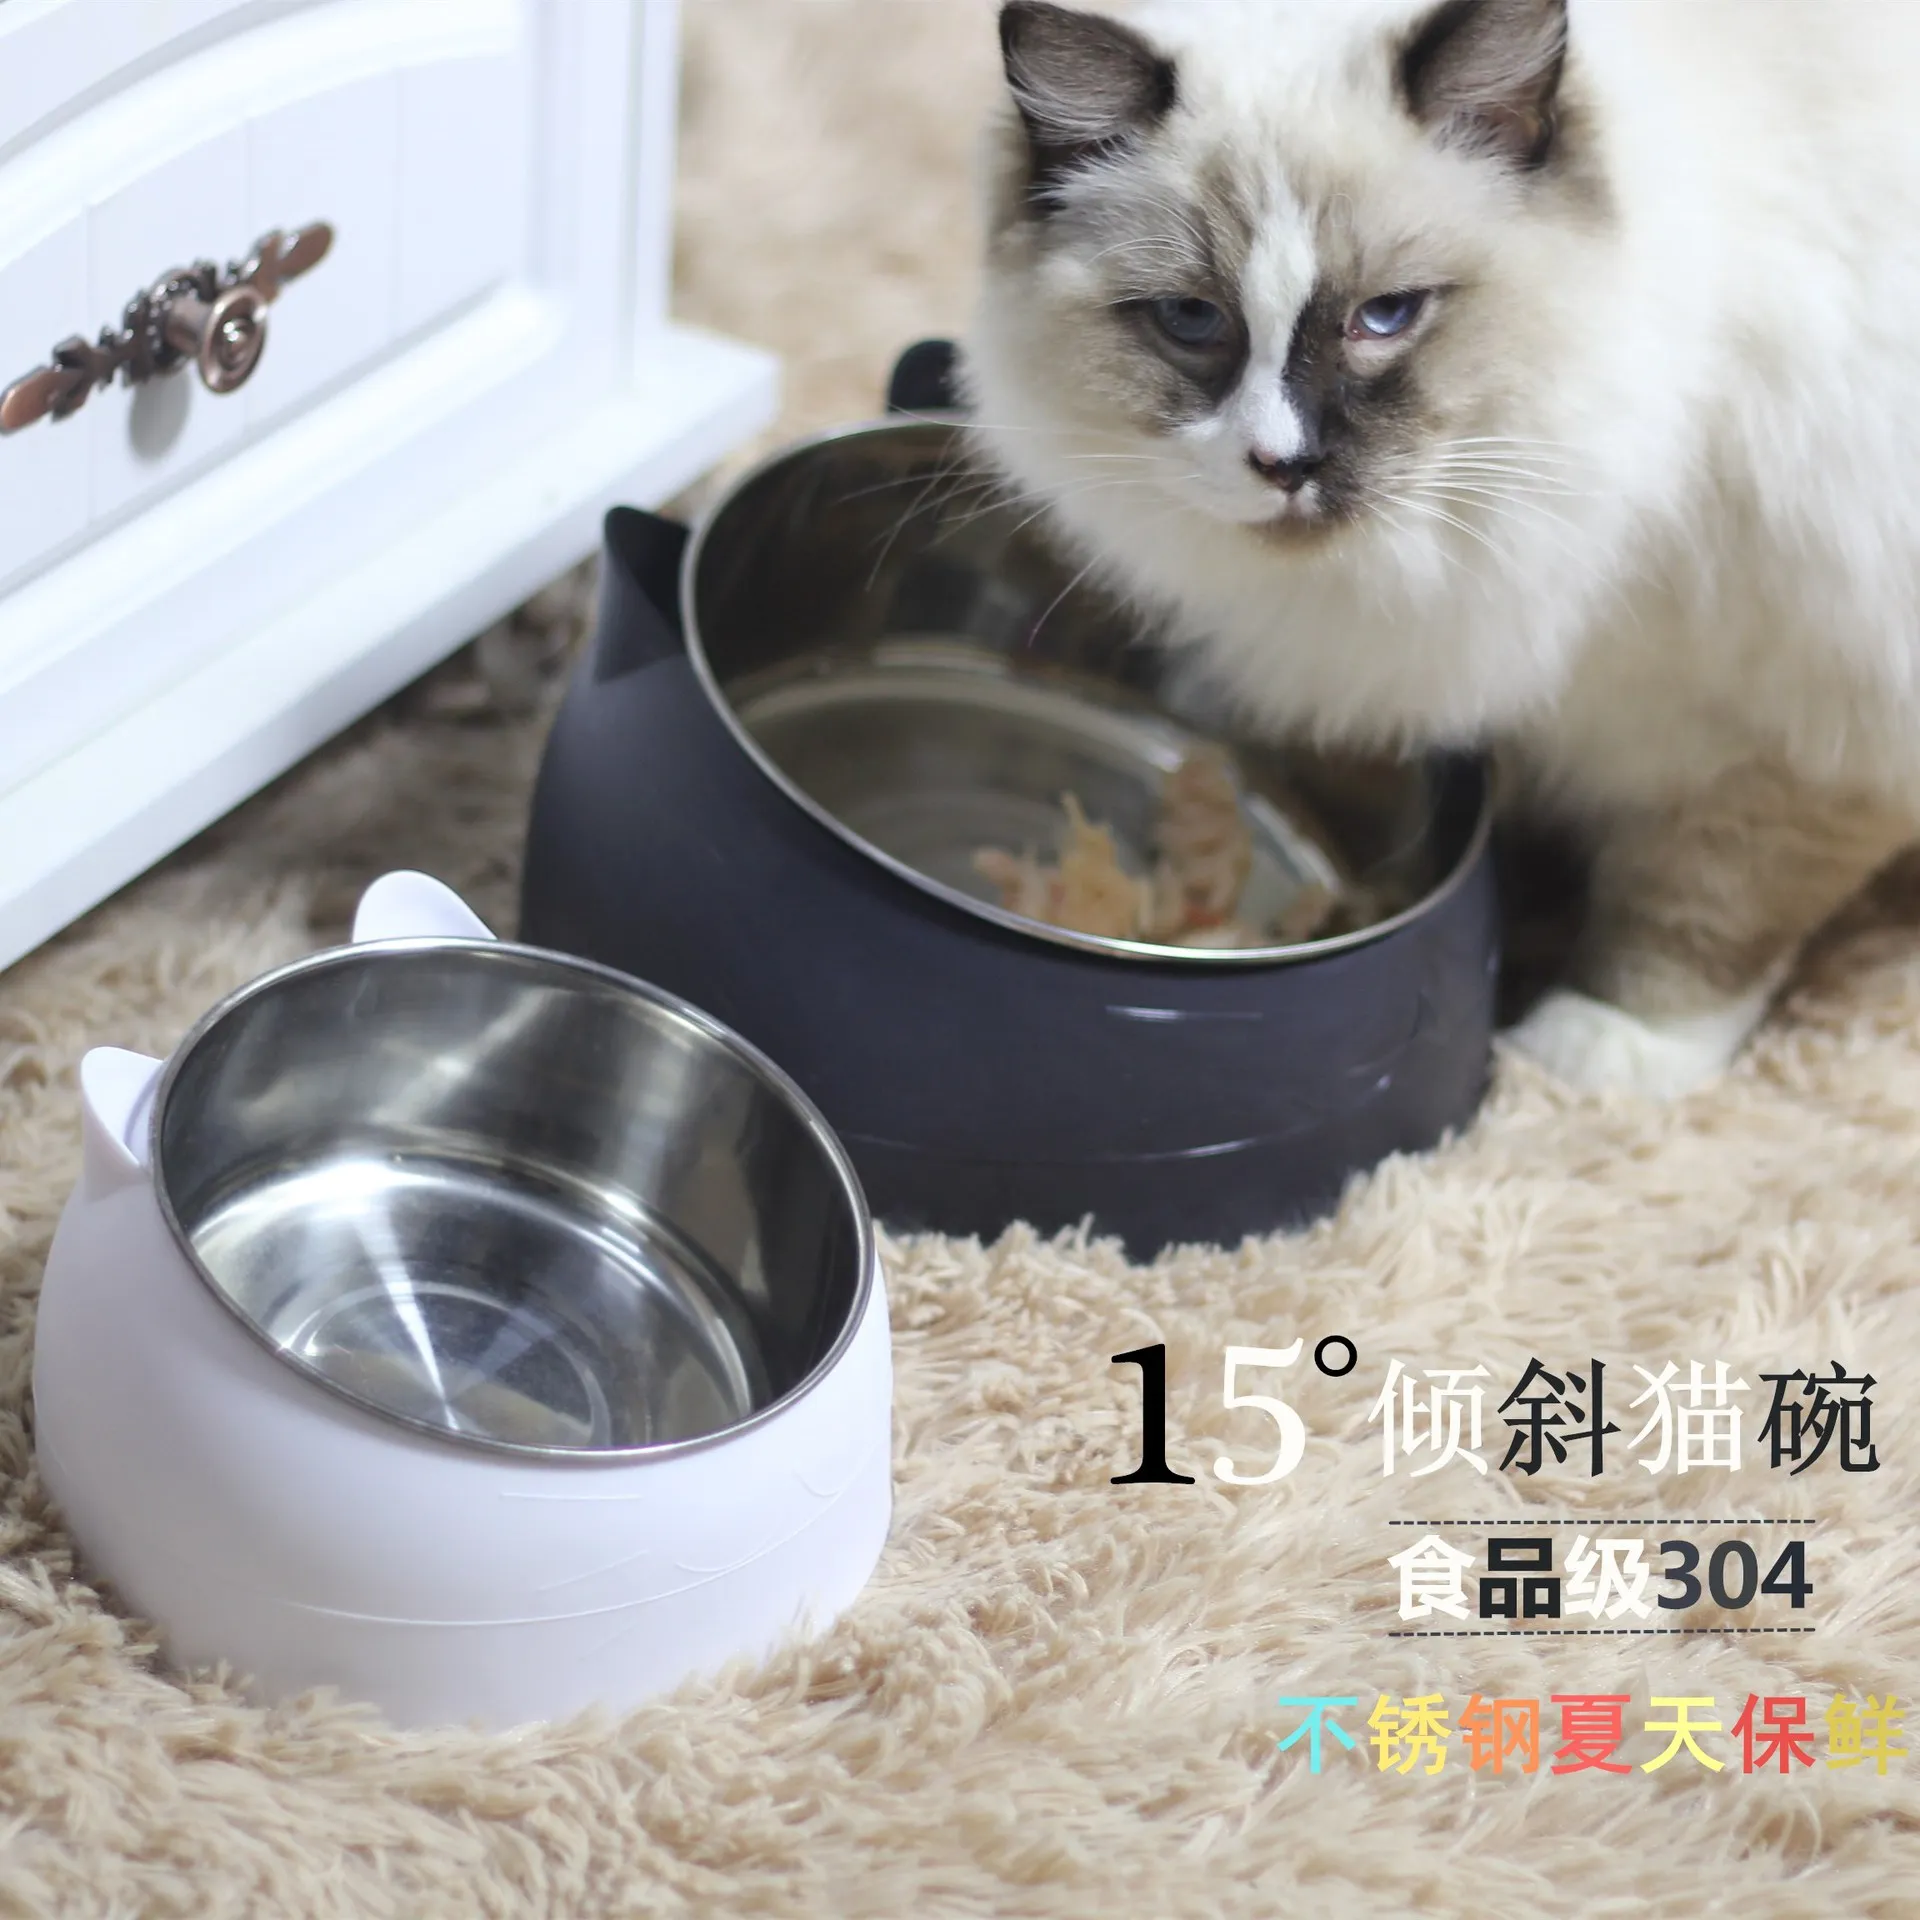 

200ml Stainless Steel Cat Bowl Non-slip Base Puppy Cats Food Drink Water Feeder Neck Protection Dish Pet Bowls